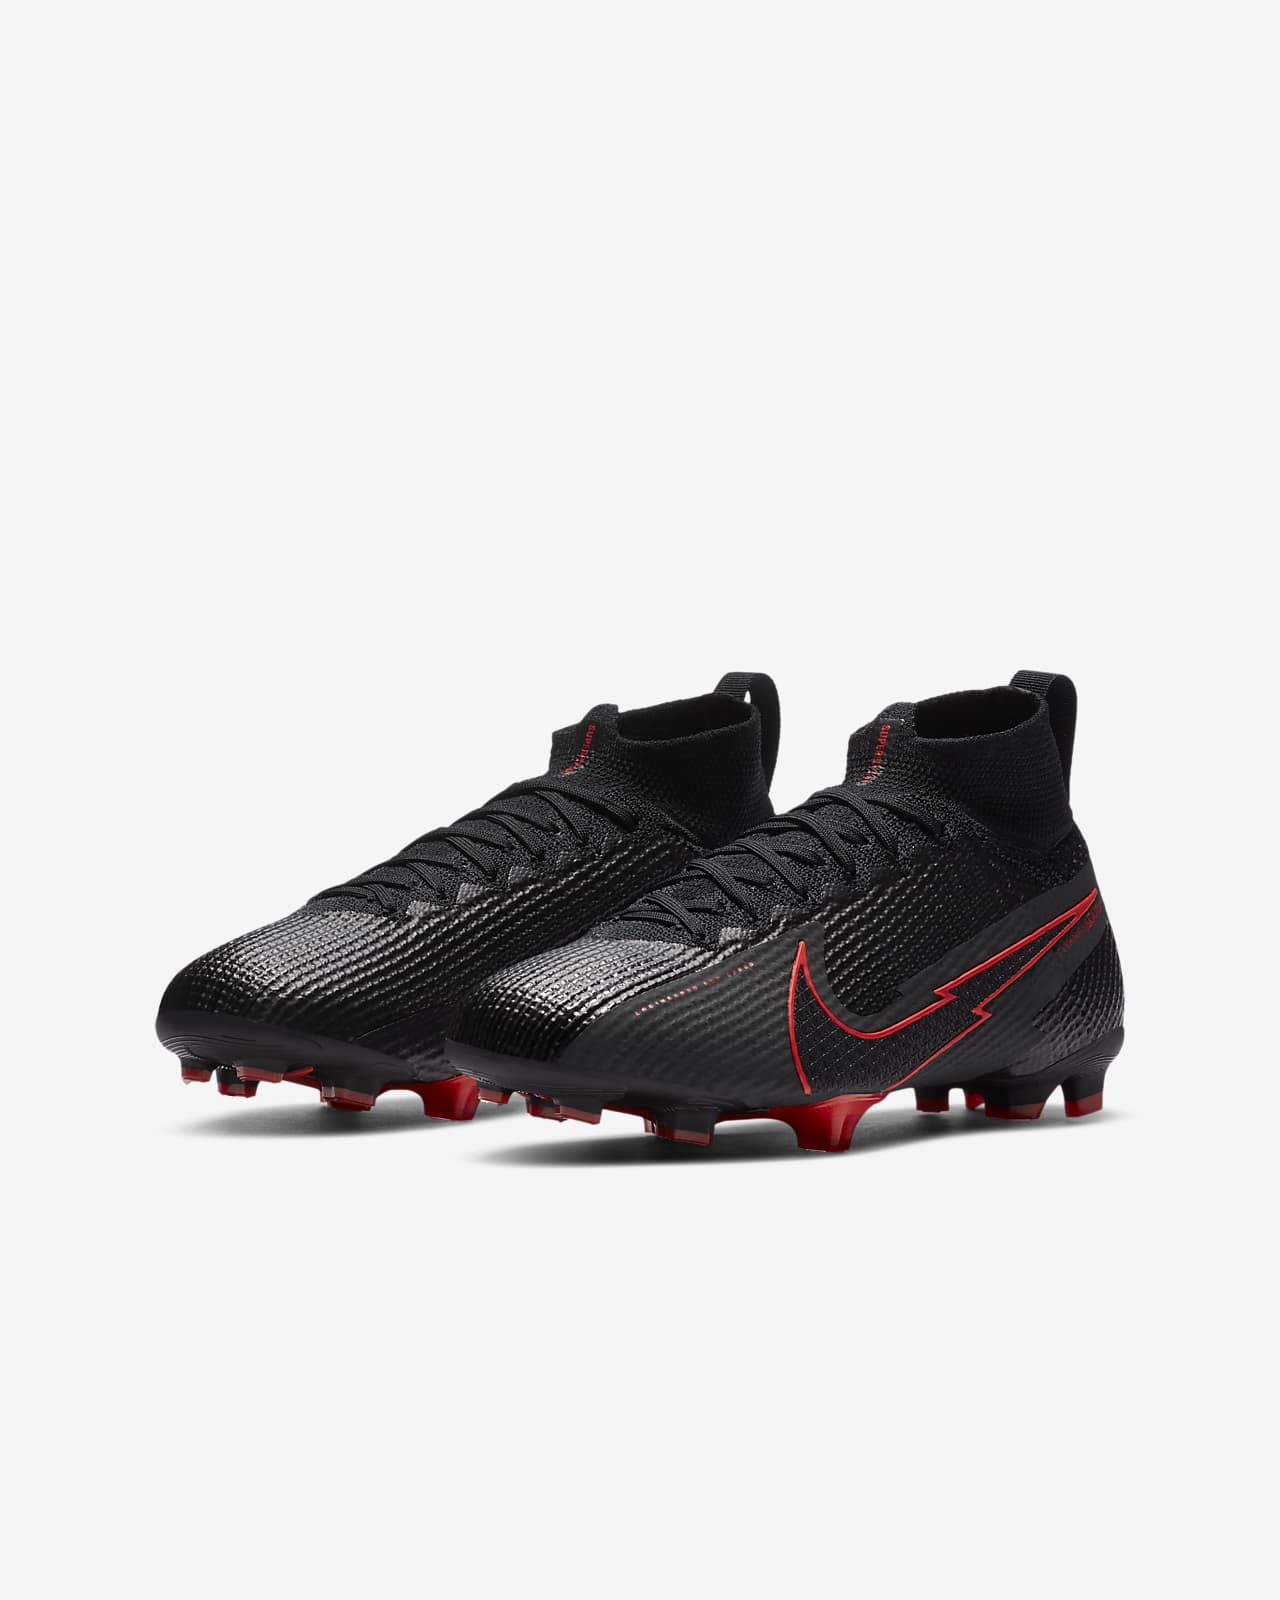 nike mercurial youth soccer cleats